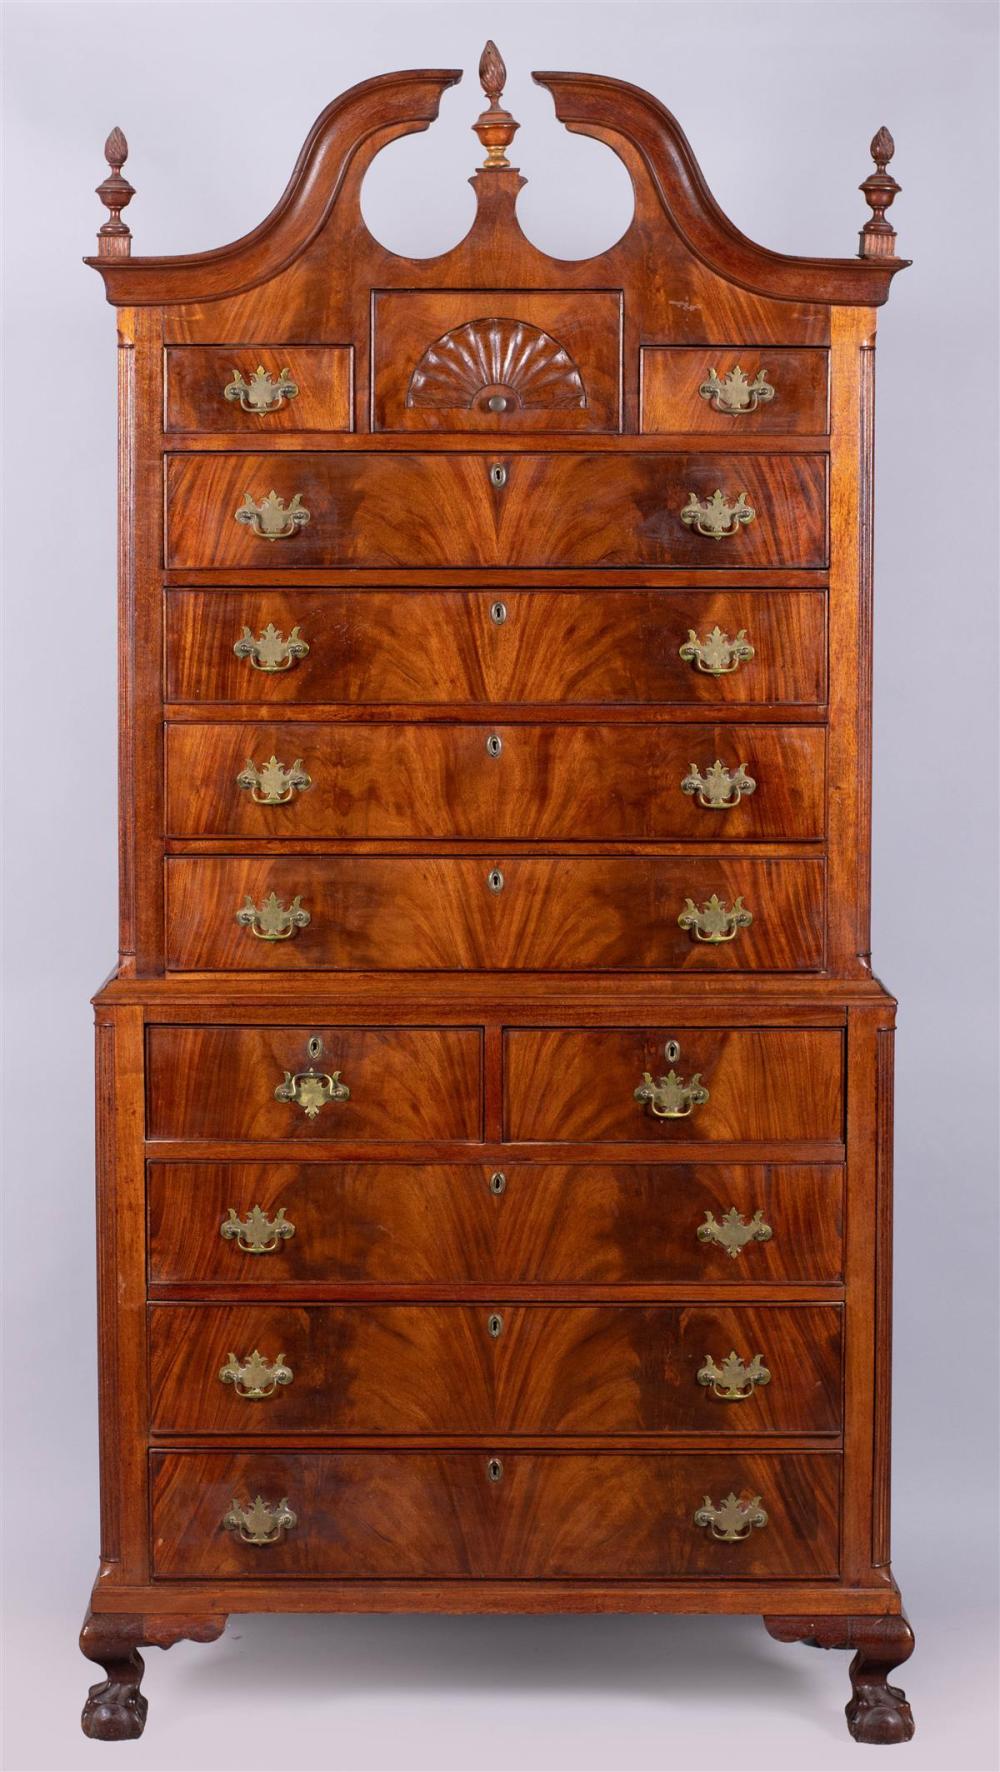 CHIPPENDALE STYLE MAHOGANY HIGHBOYCHIPPENDALE 33c1a8